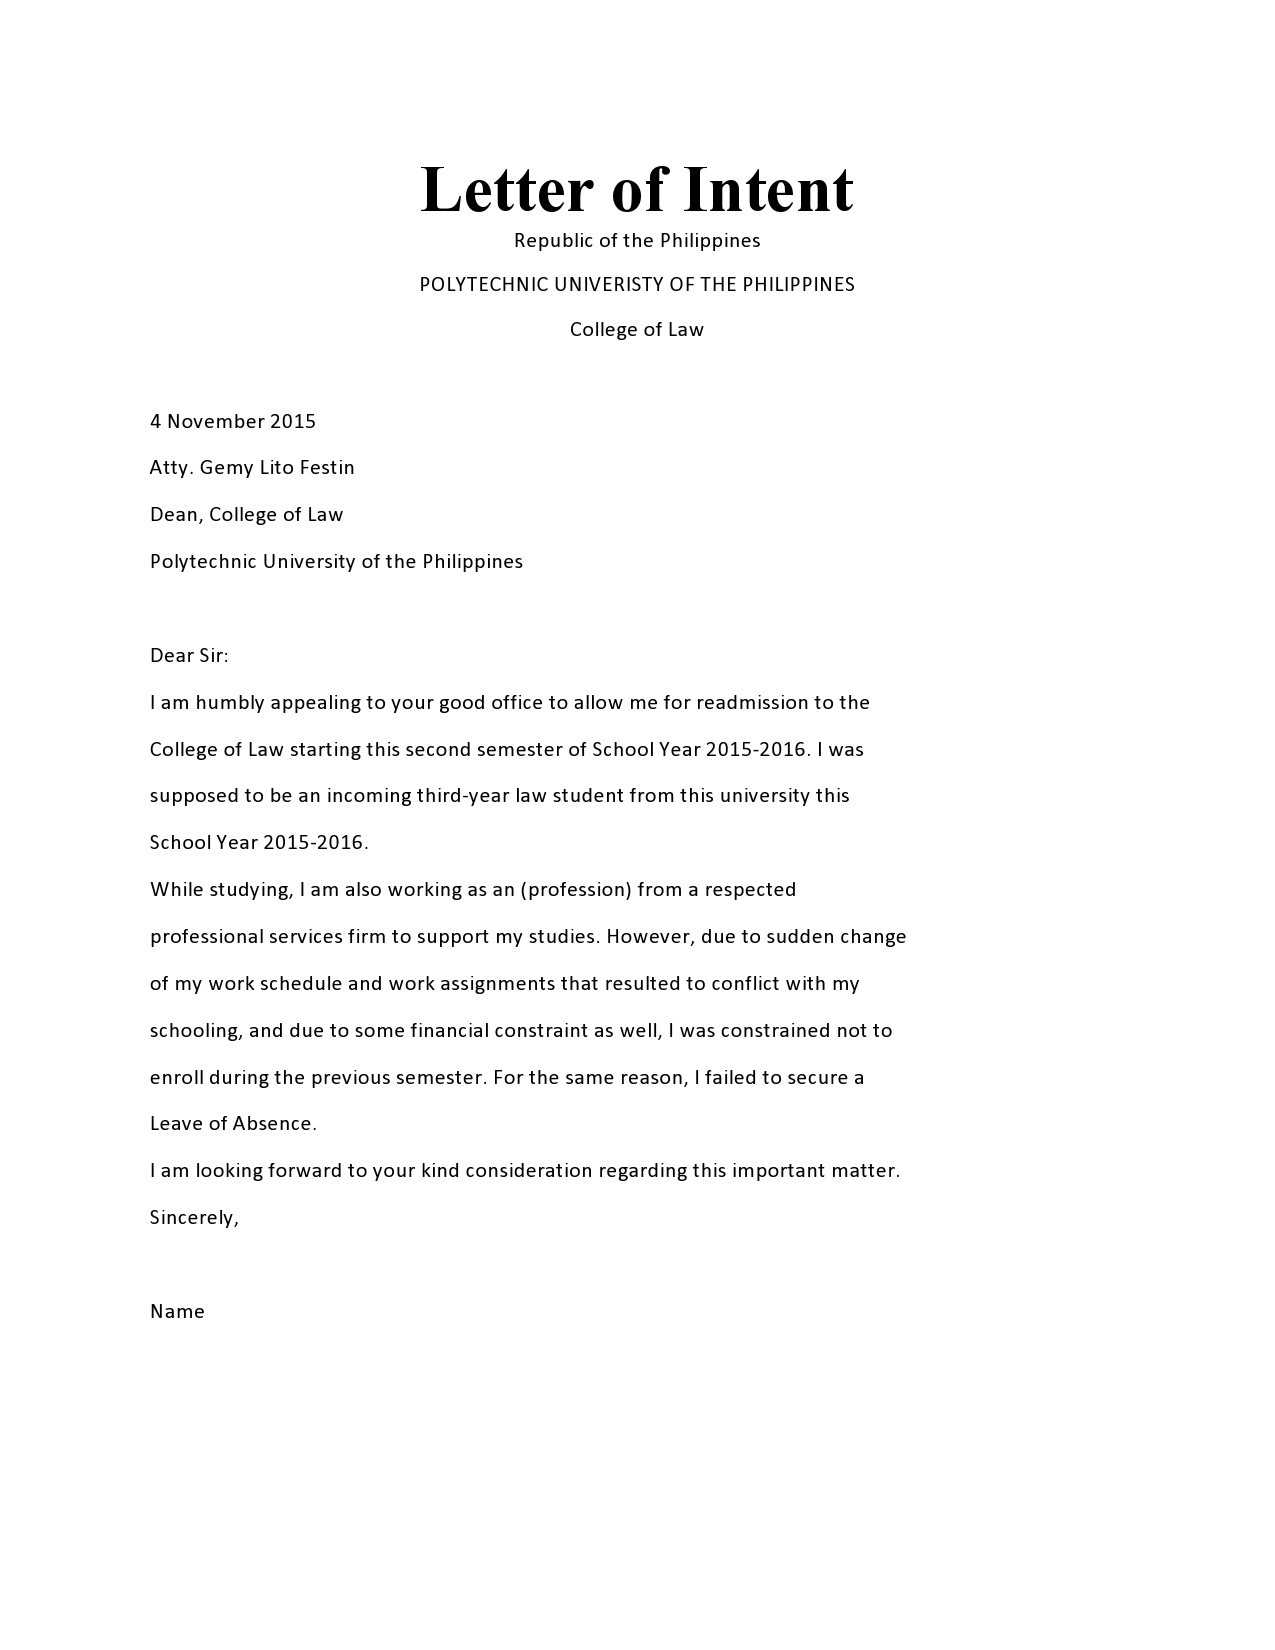 Free letter of intent for graduate school 25